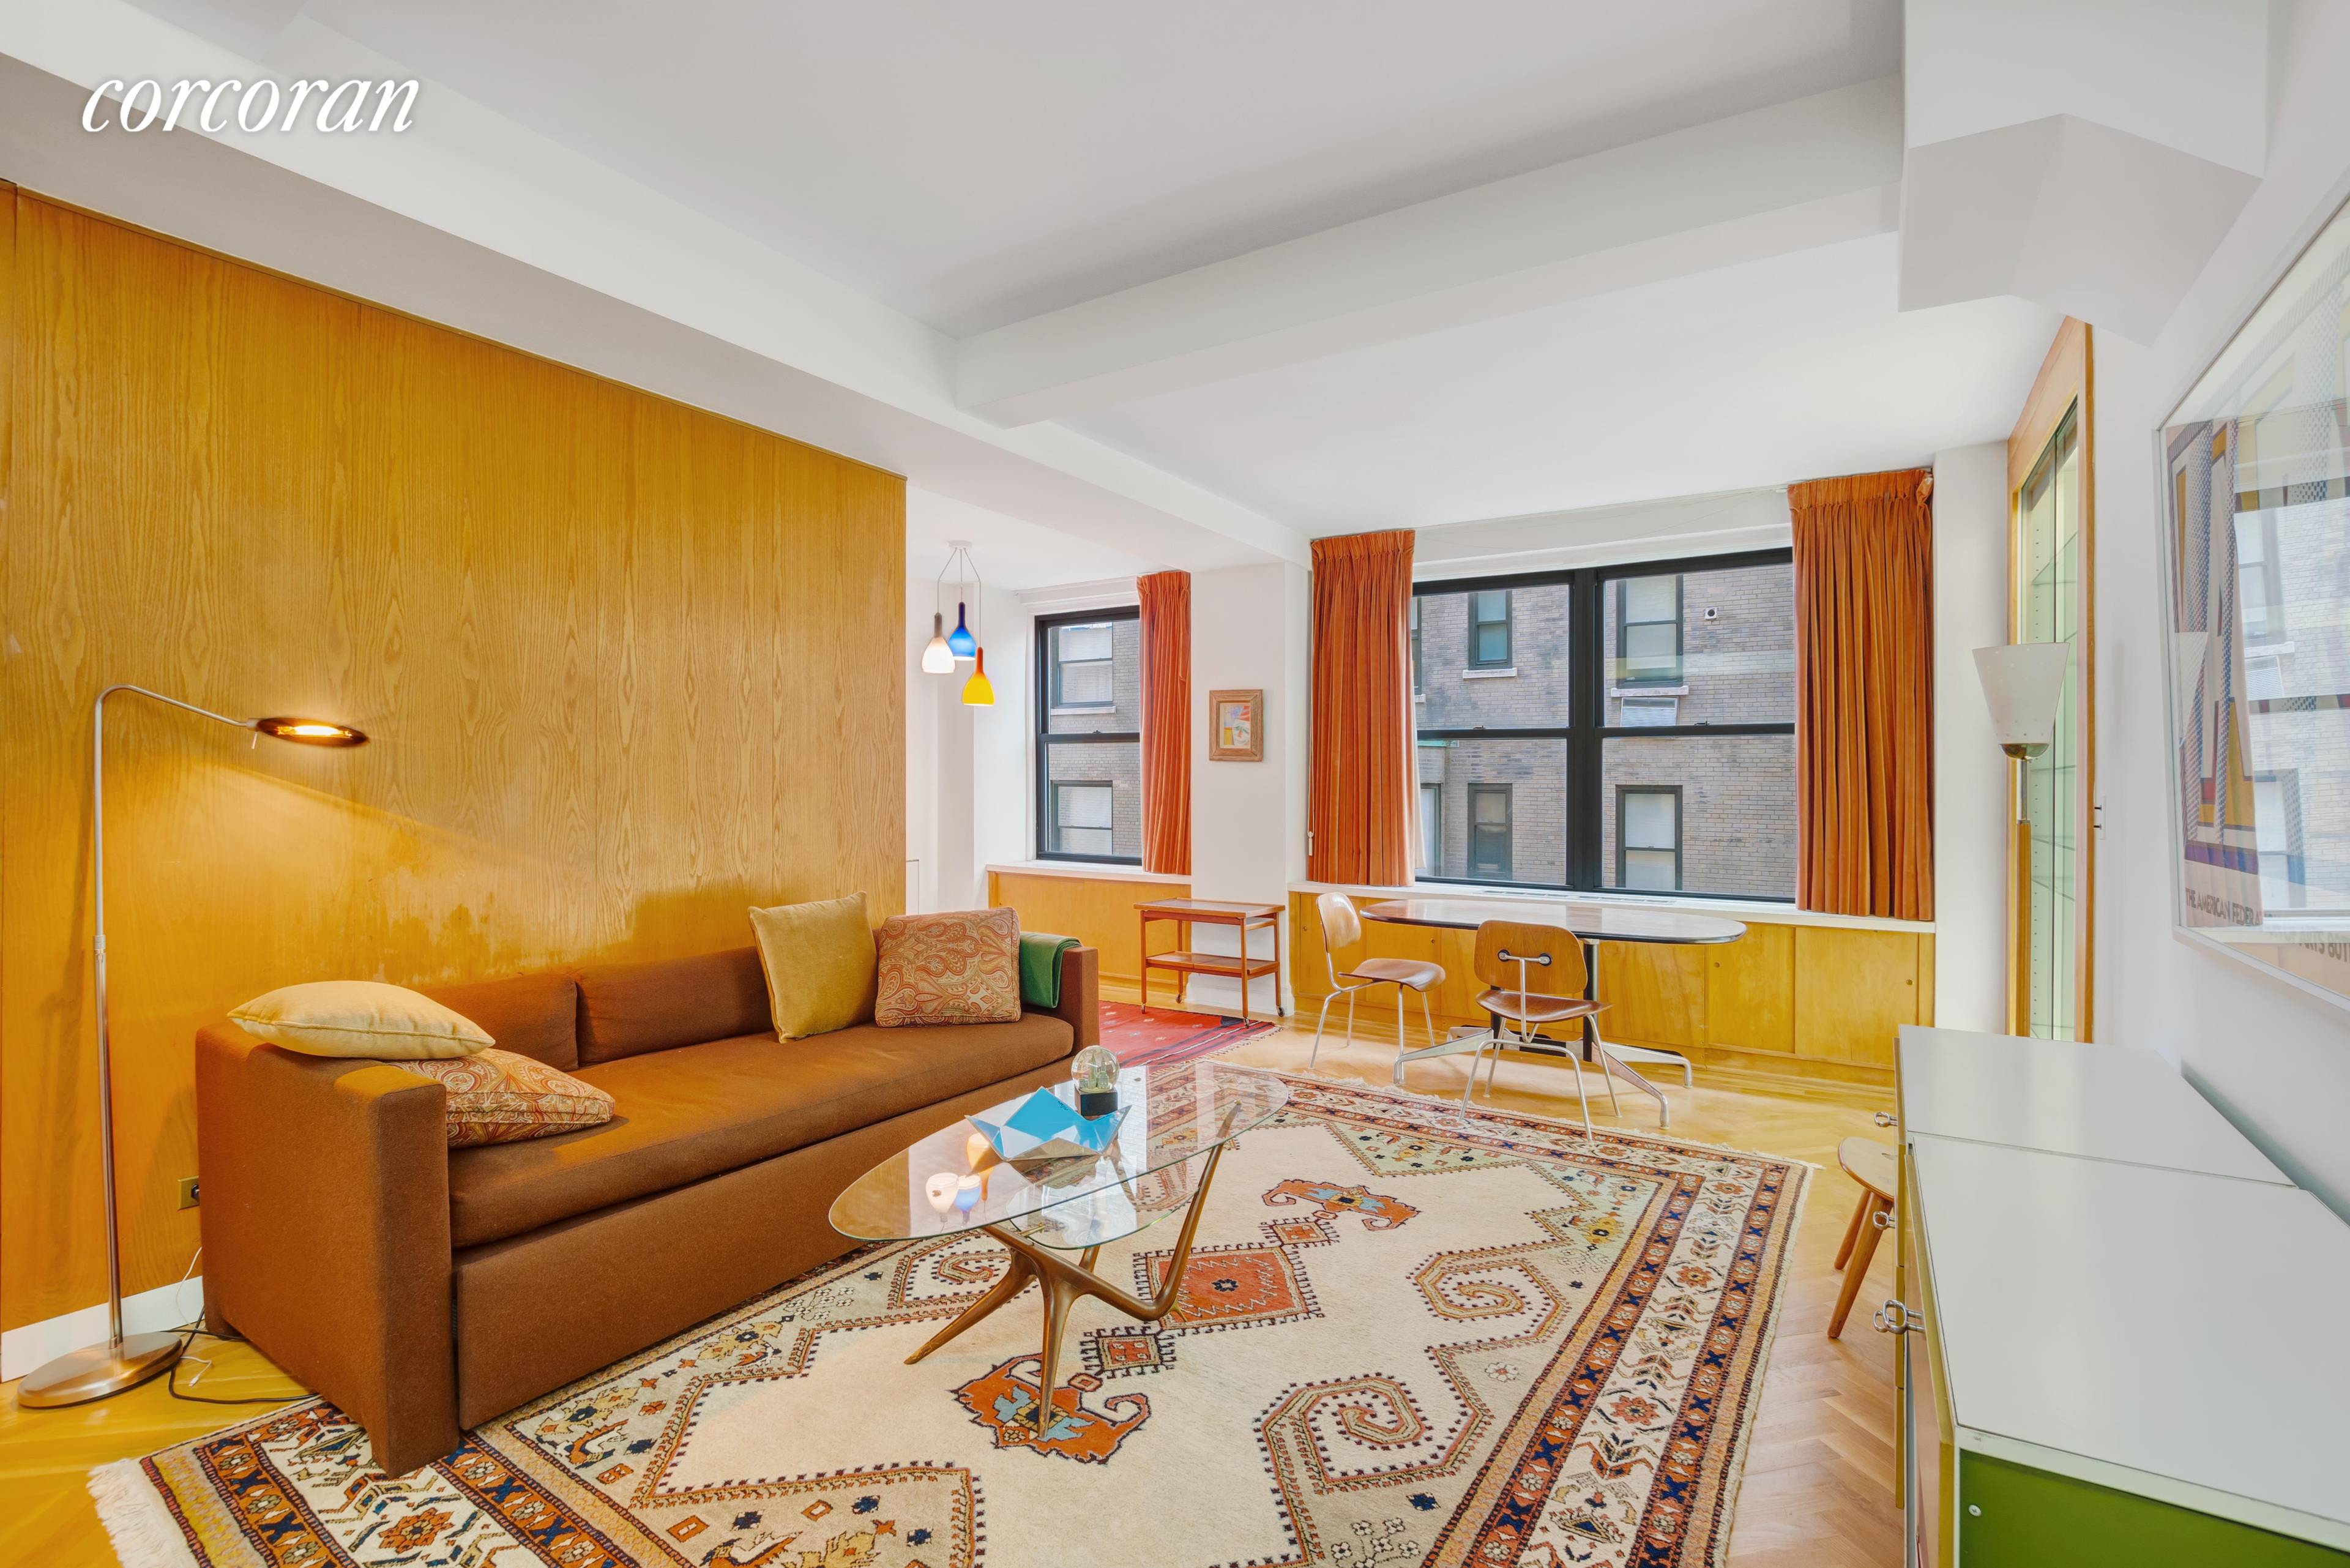 Gracious prewar apartment in one of East End Avenue's most sought after co operative buildings designed by the famed architect Emery Roth.